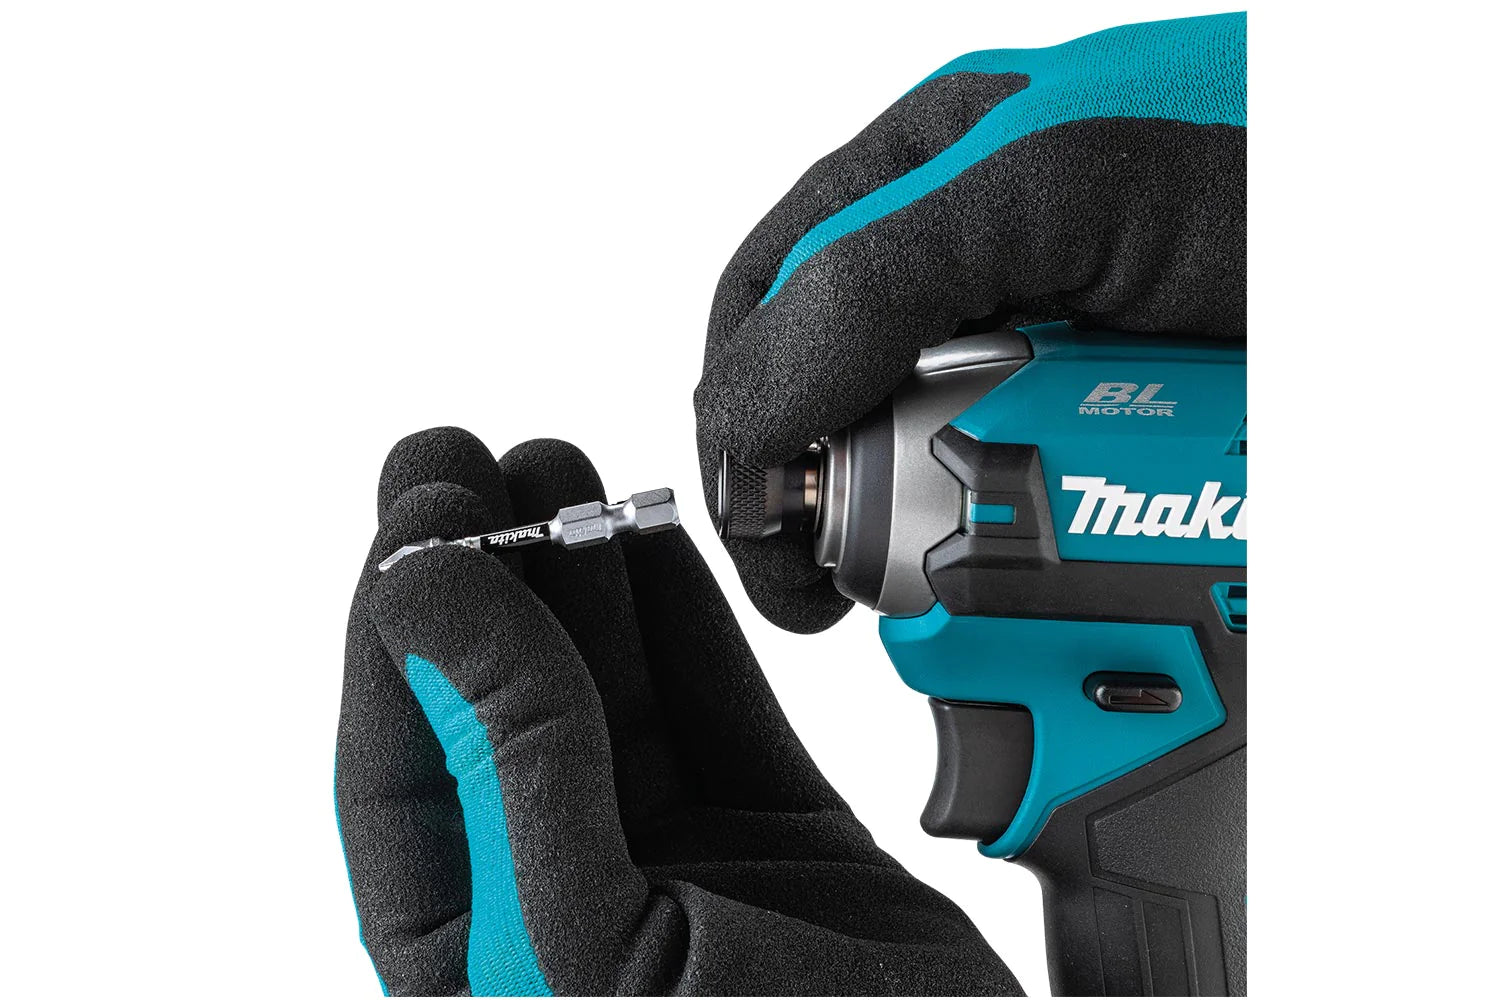 Makita TD003GZ 40V Brushless Impact Driver With 1 x 2.5Ah Battery Charger & Bag